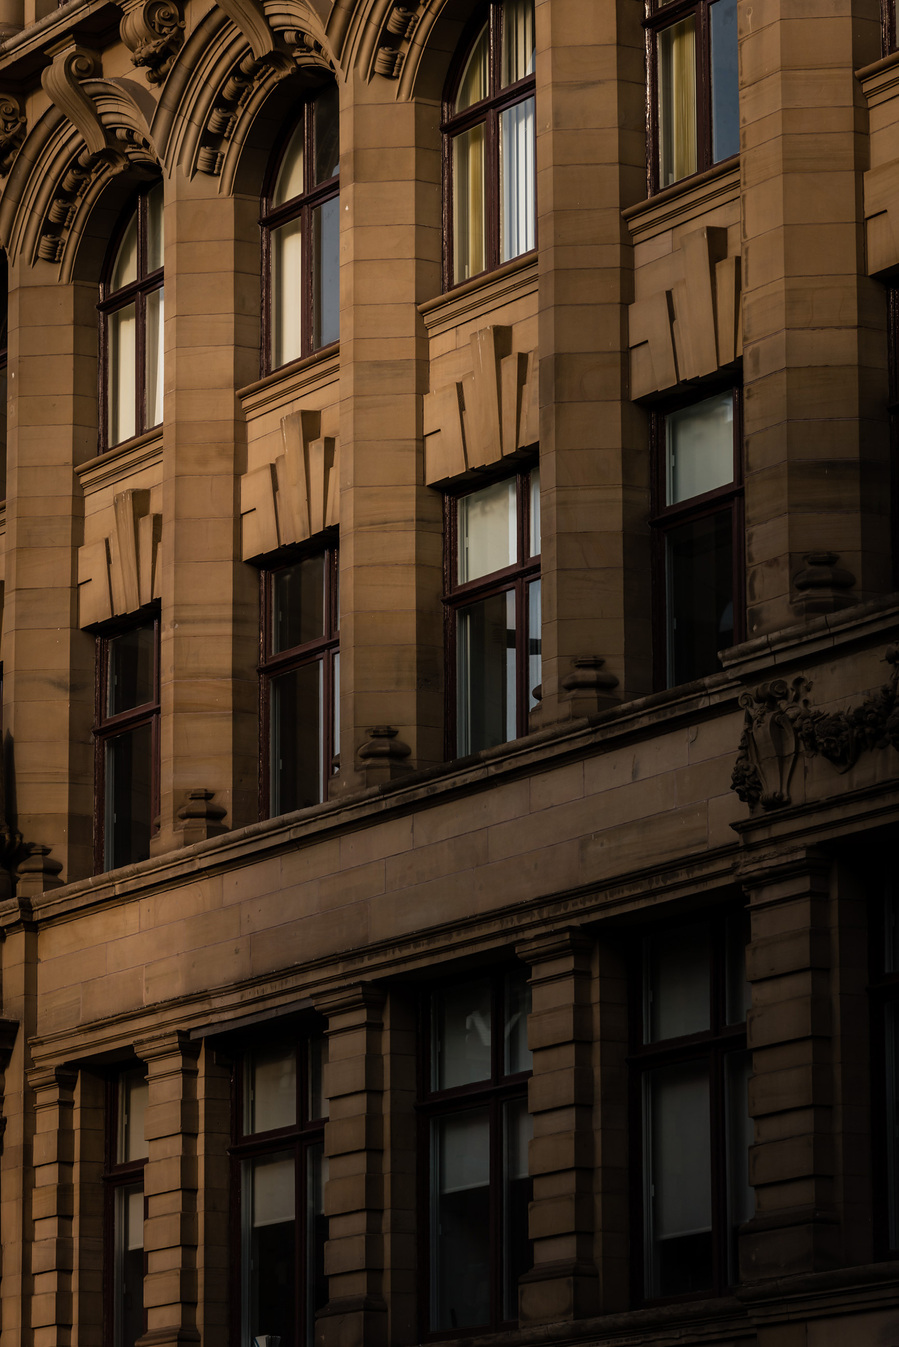 classic manchester architecture. city centre building. photographed with shadows across frontage of brickwork